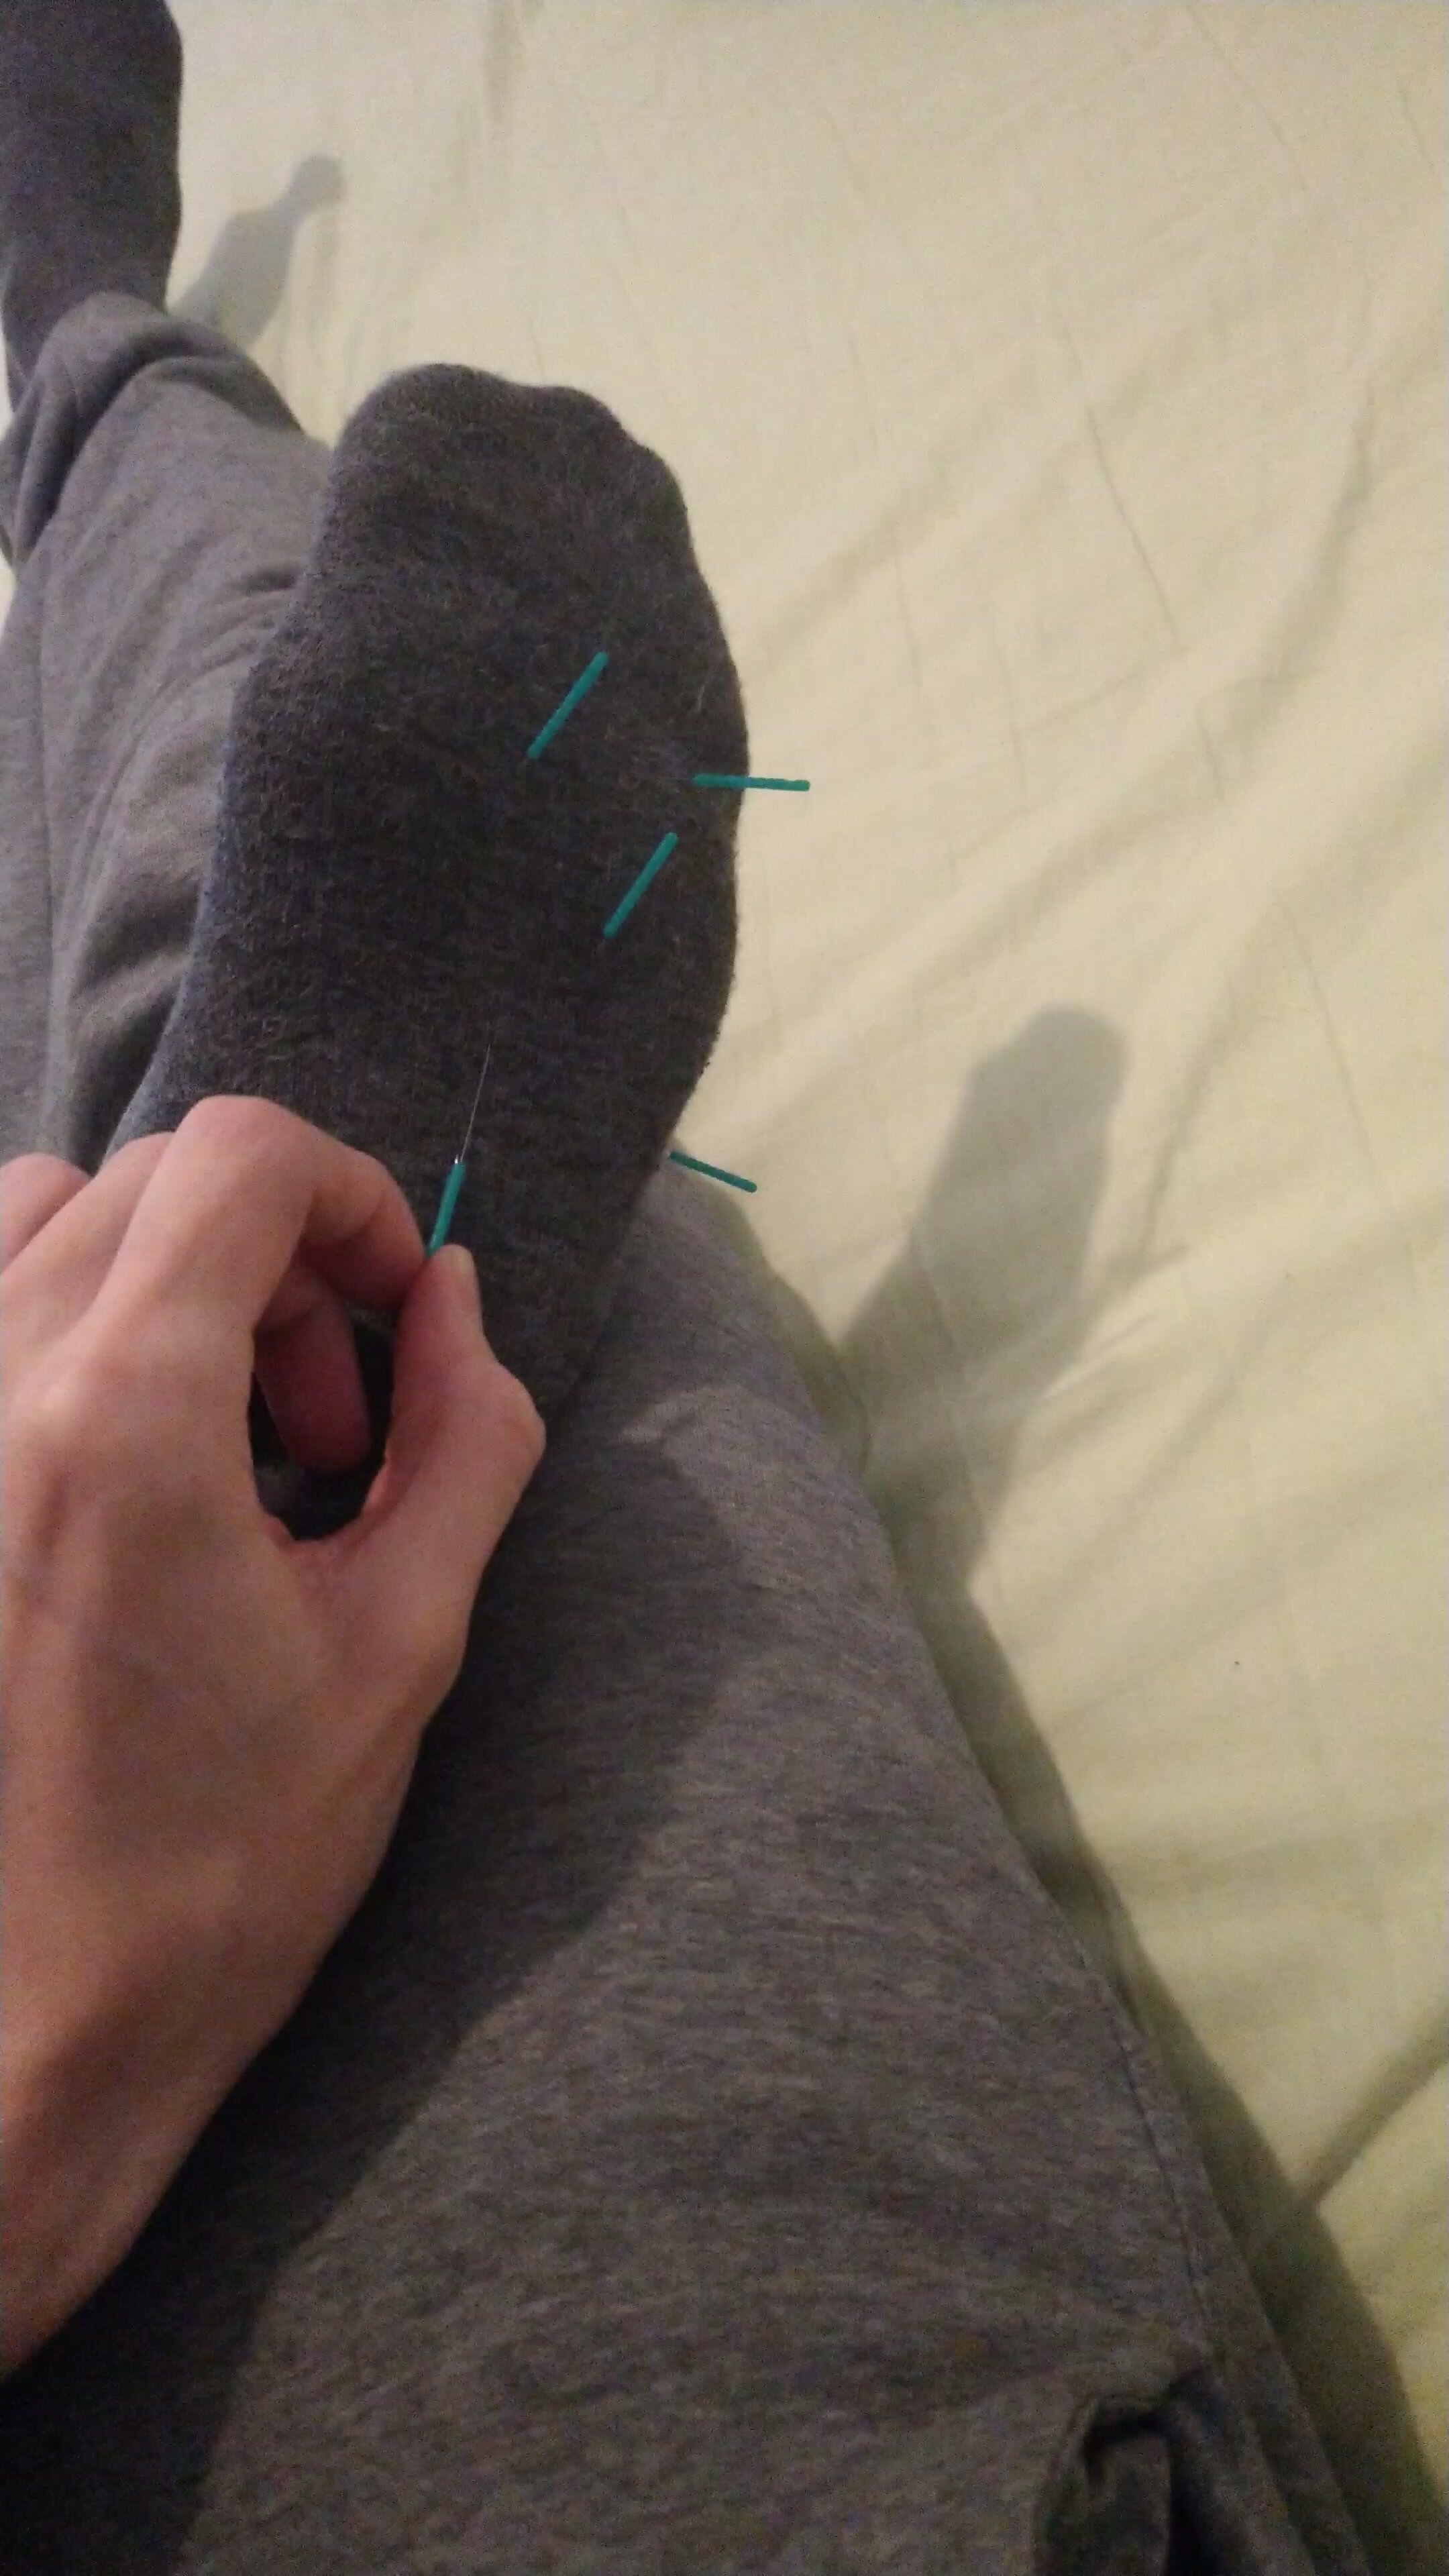 Removing acupuncture needles from foot